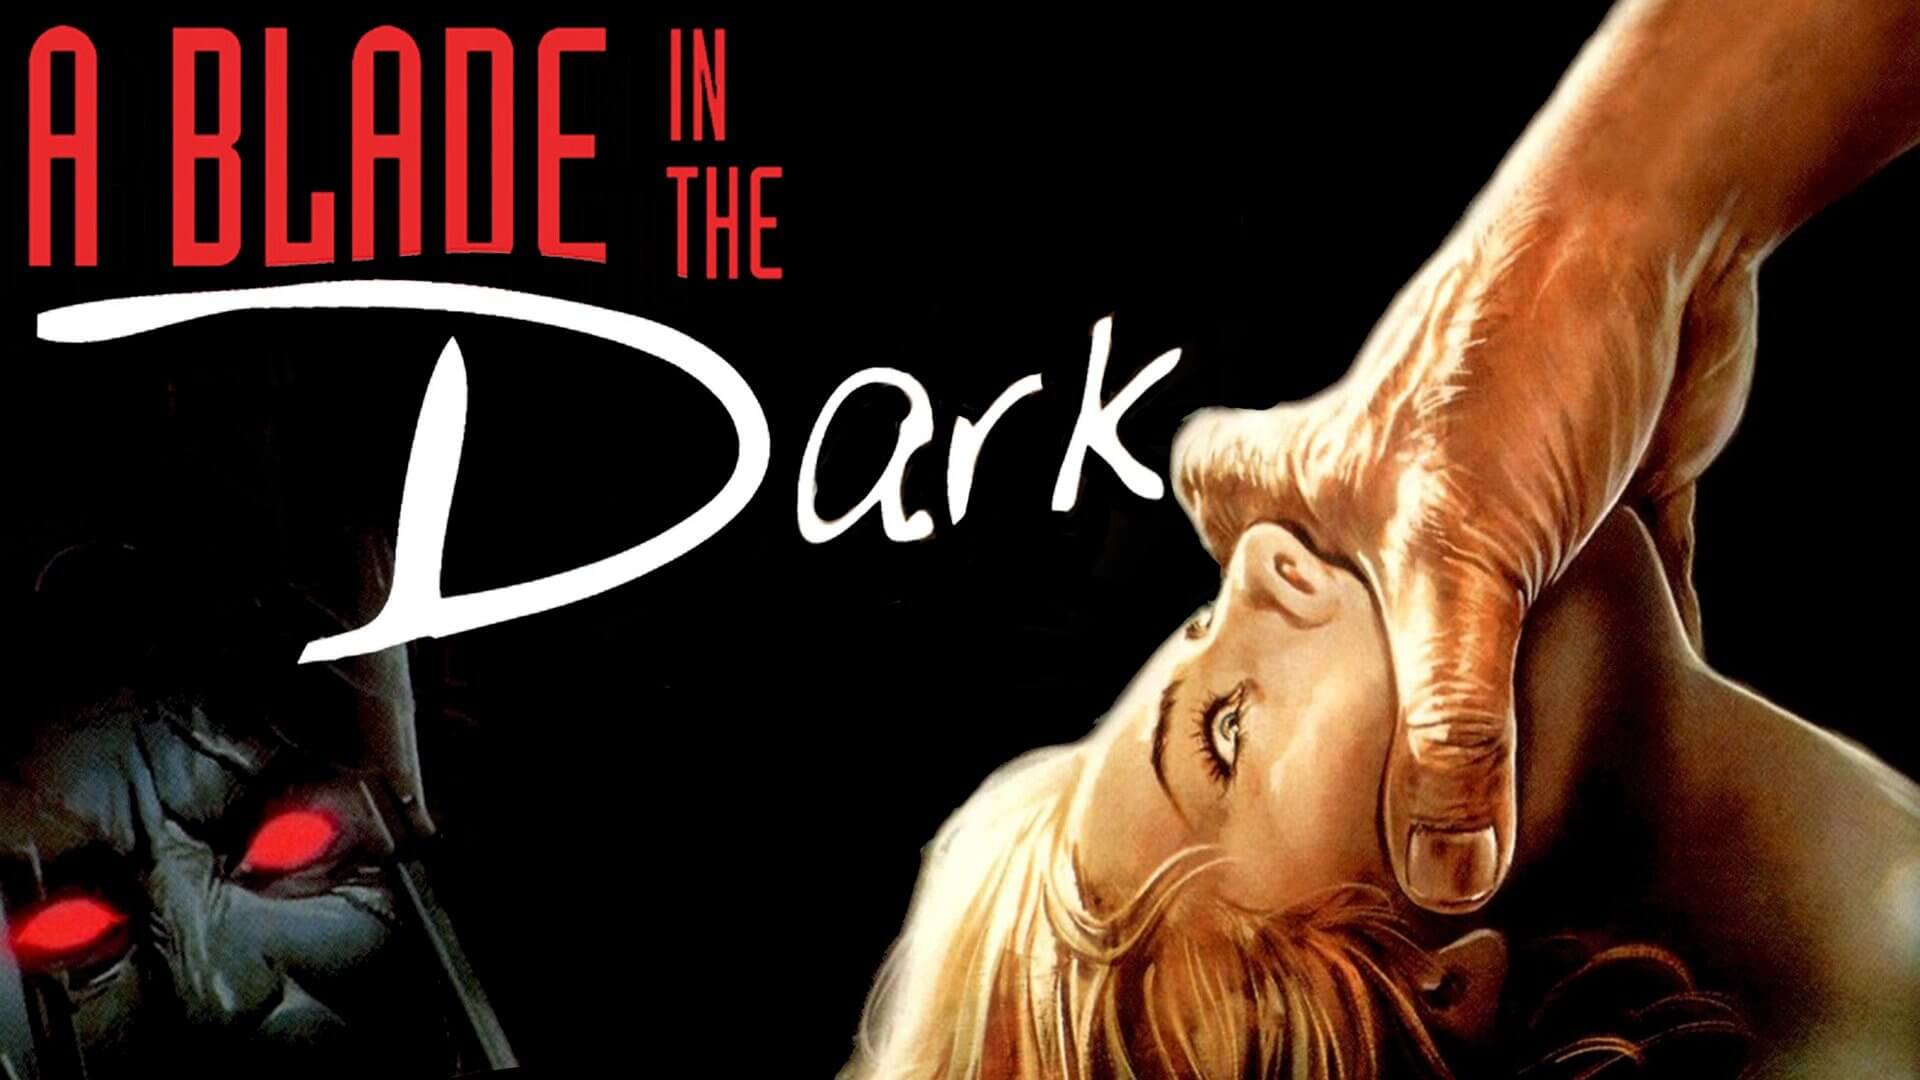 A Blade in the Dark Review